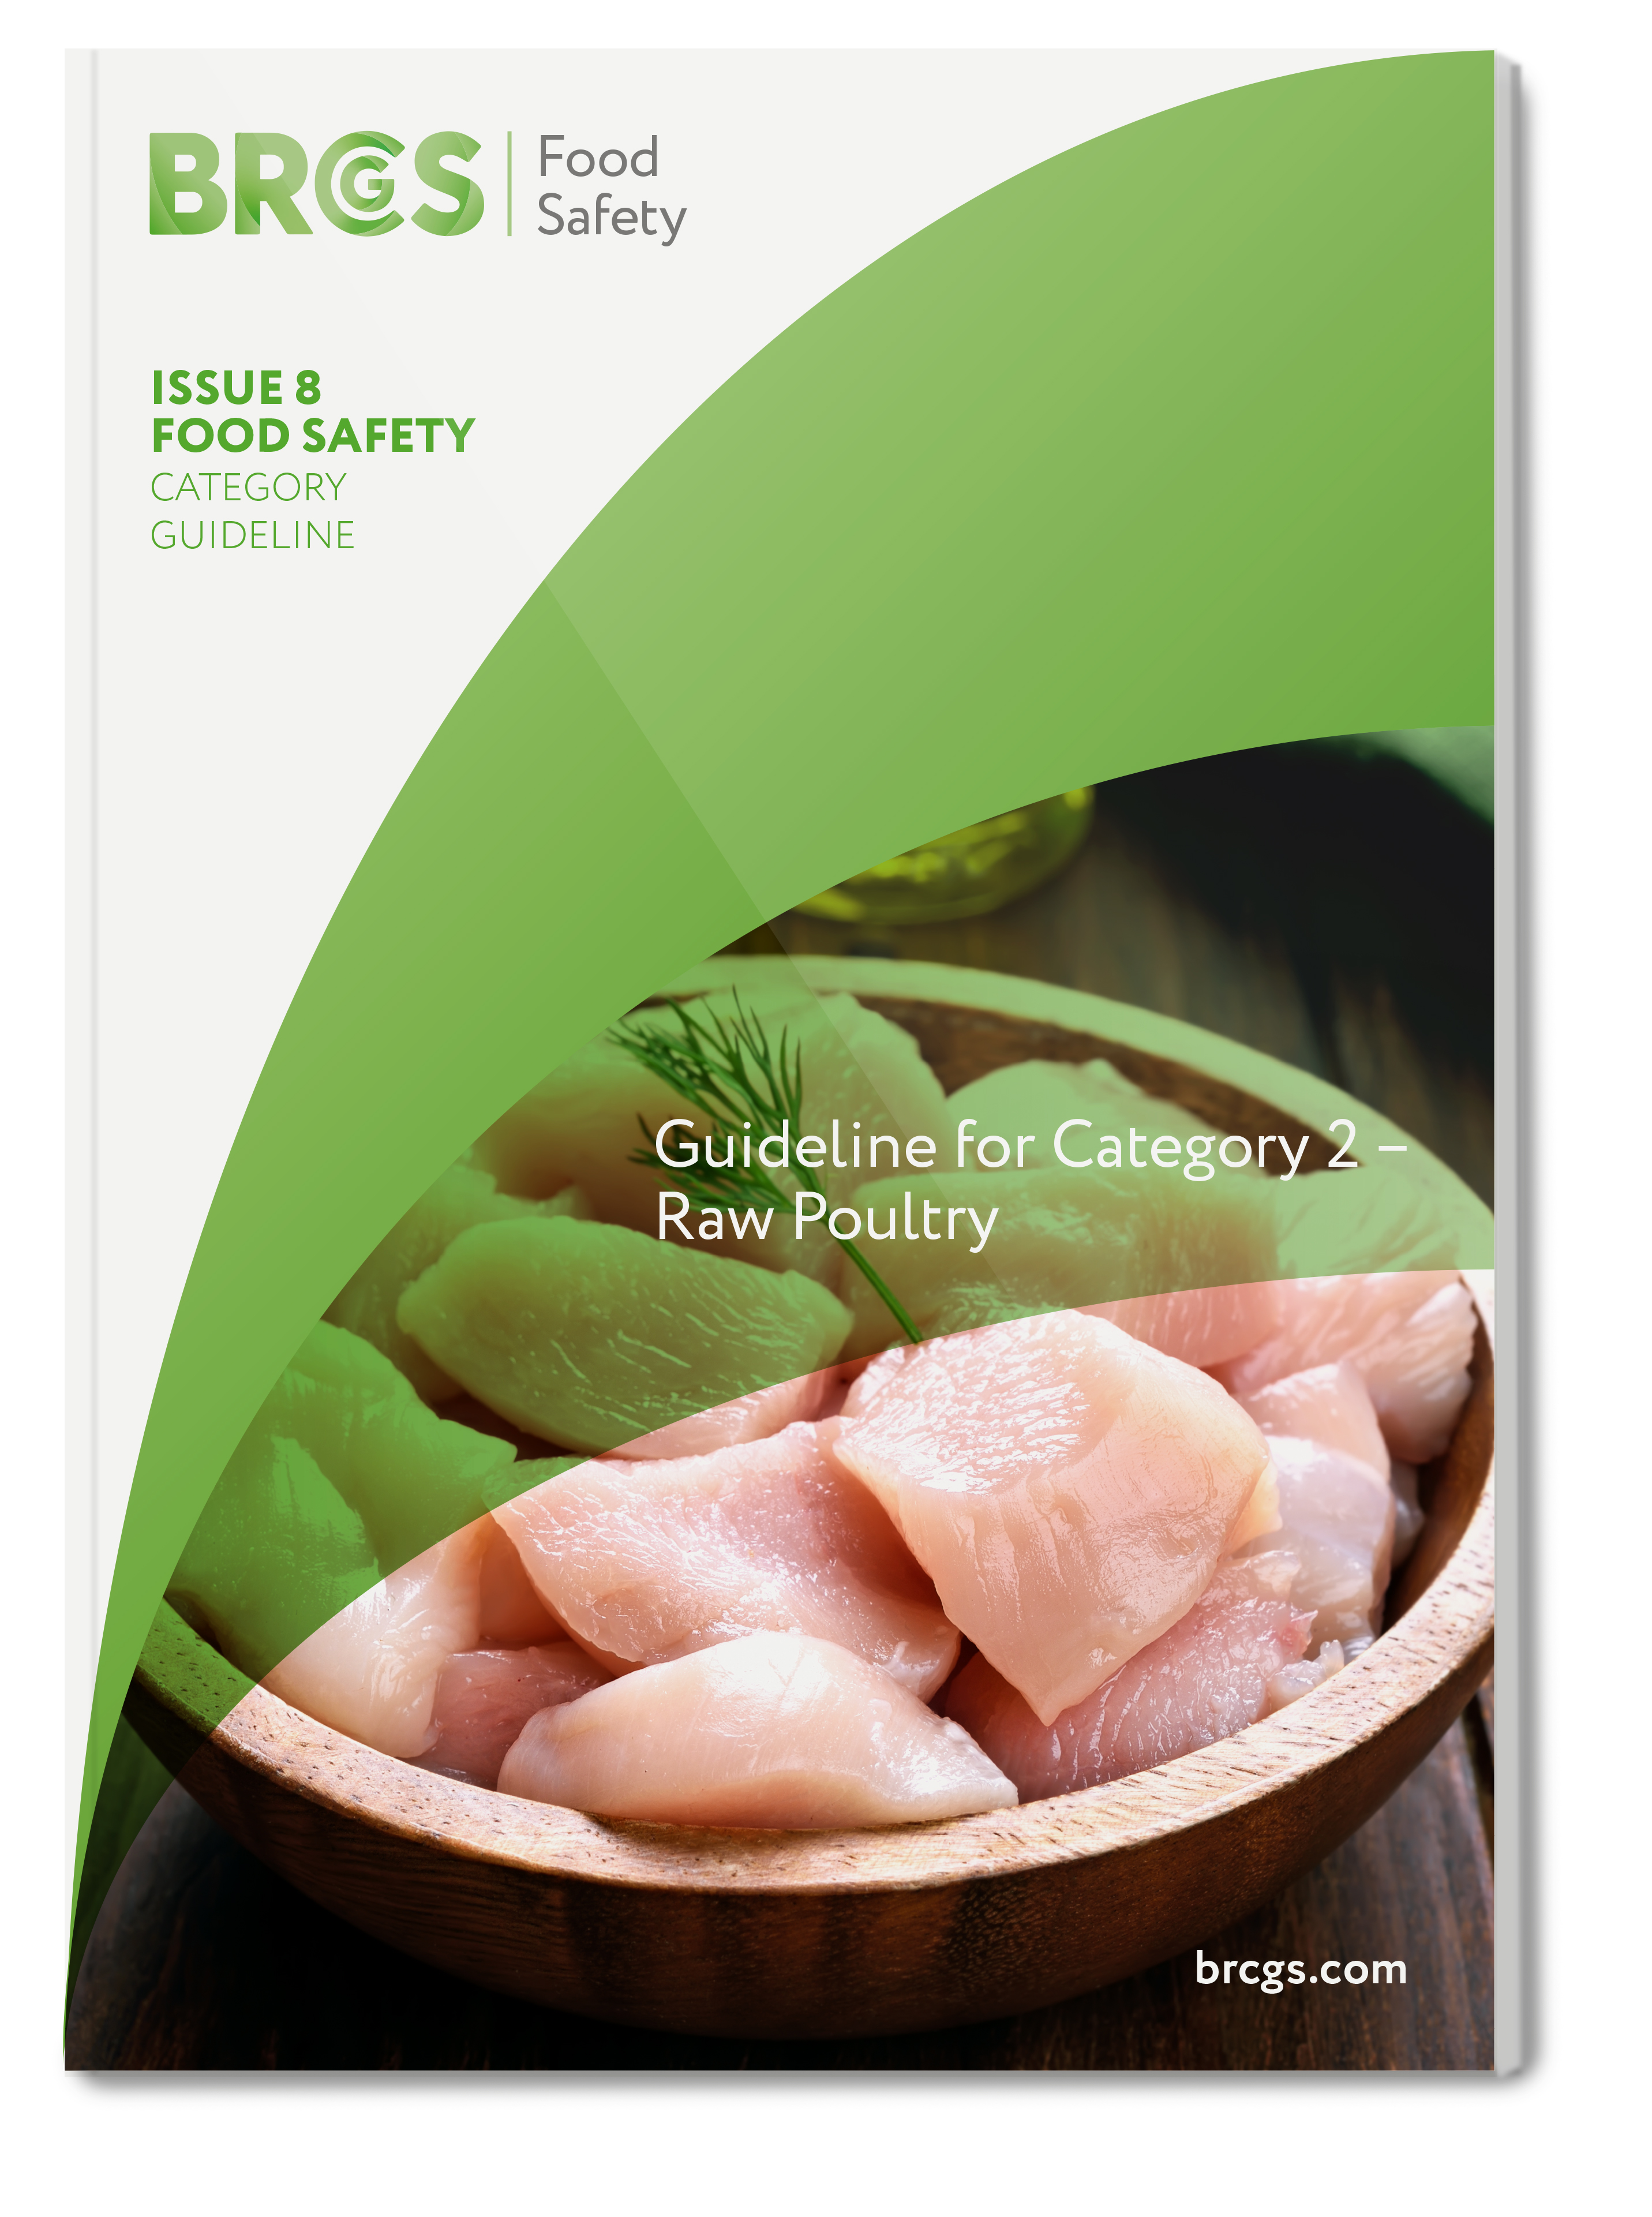 Guideline for Category 2 - Raw Poultry